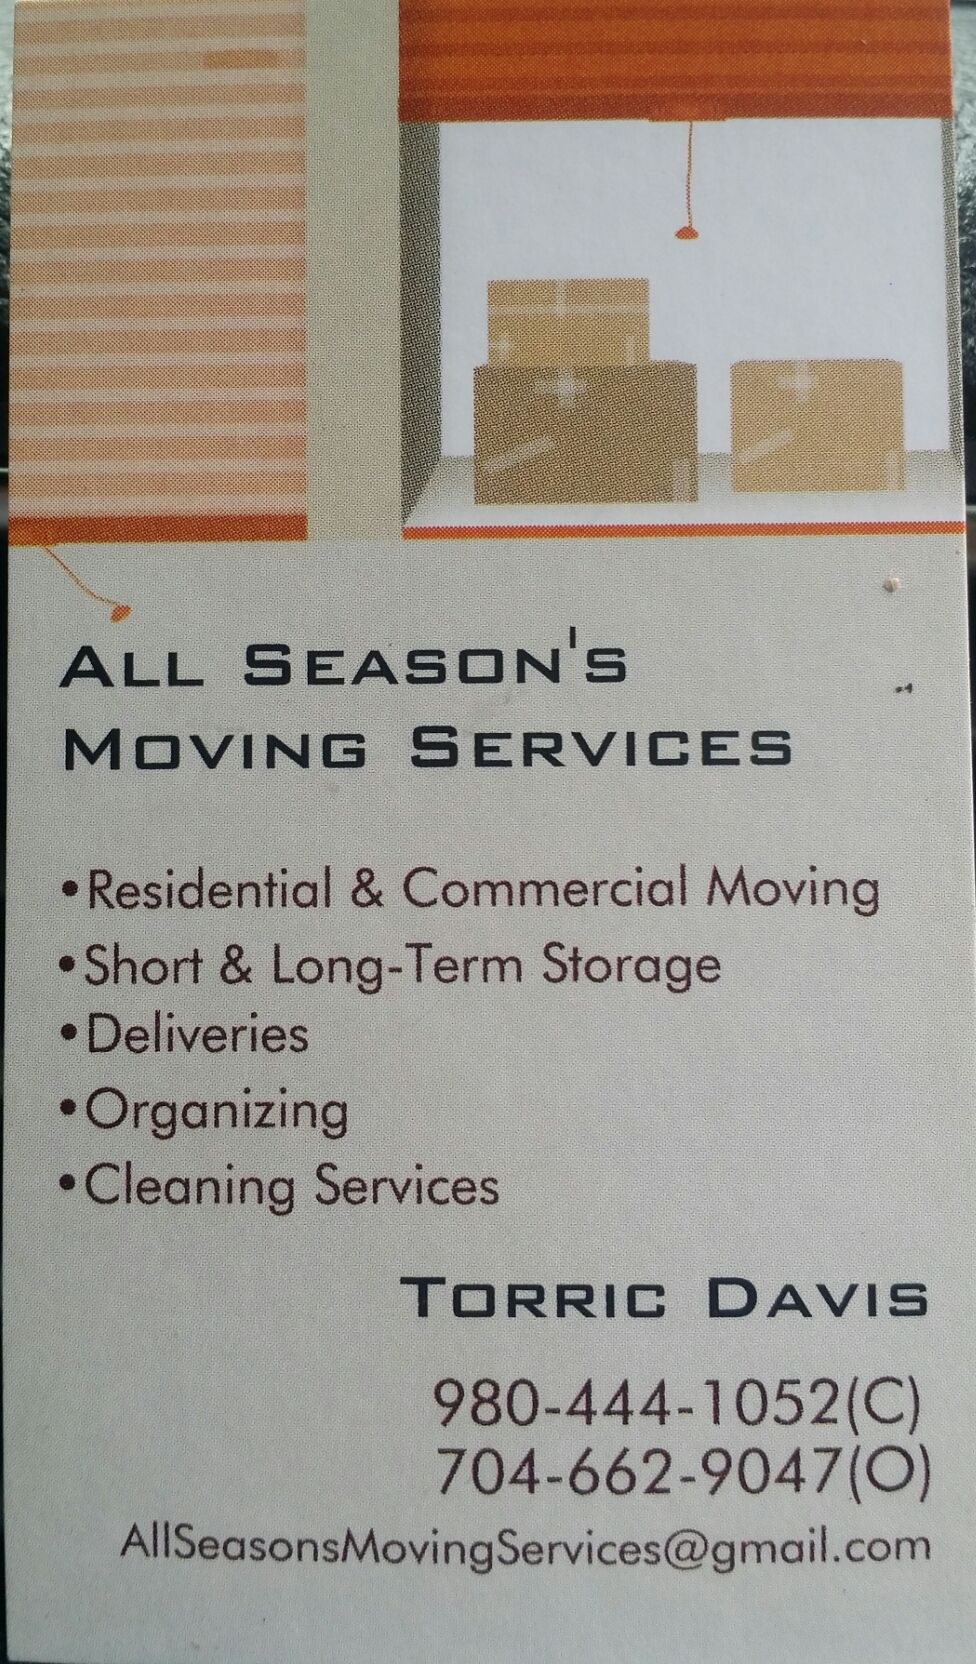 All Seasons Moving Services